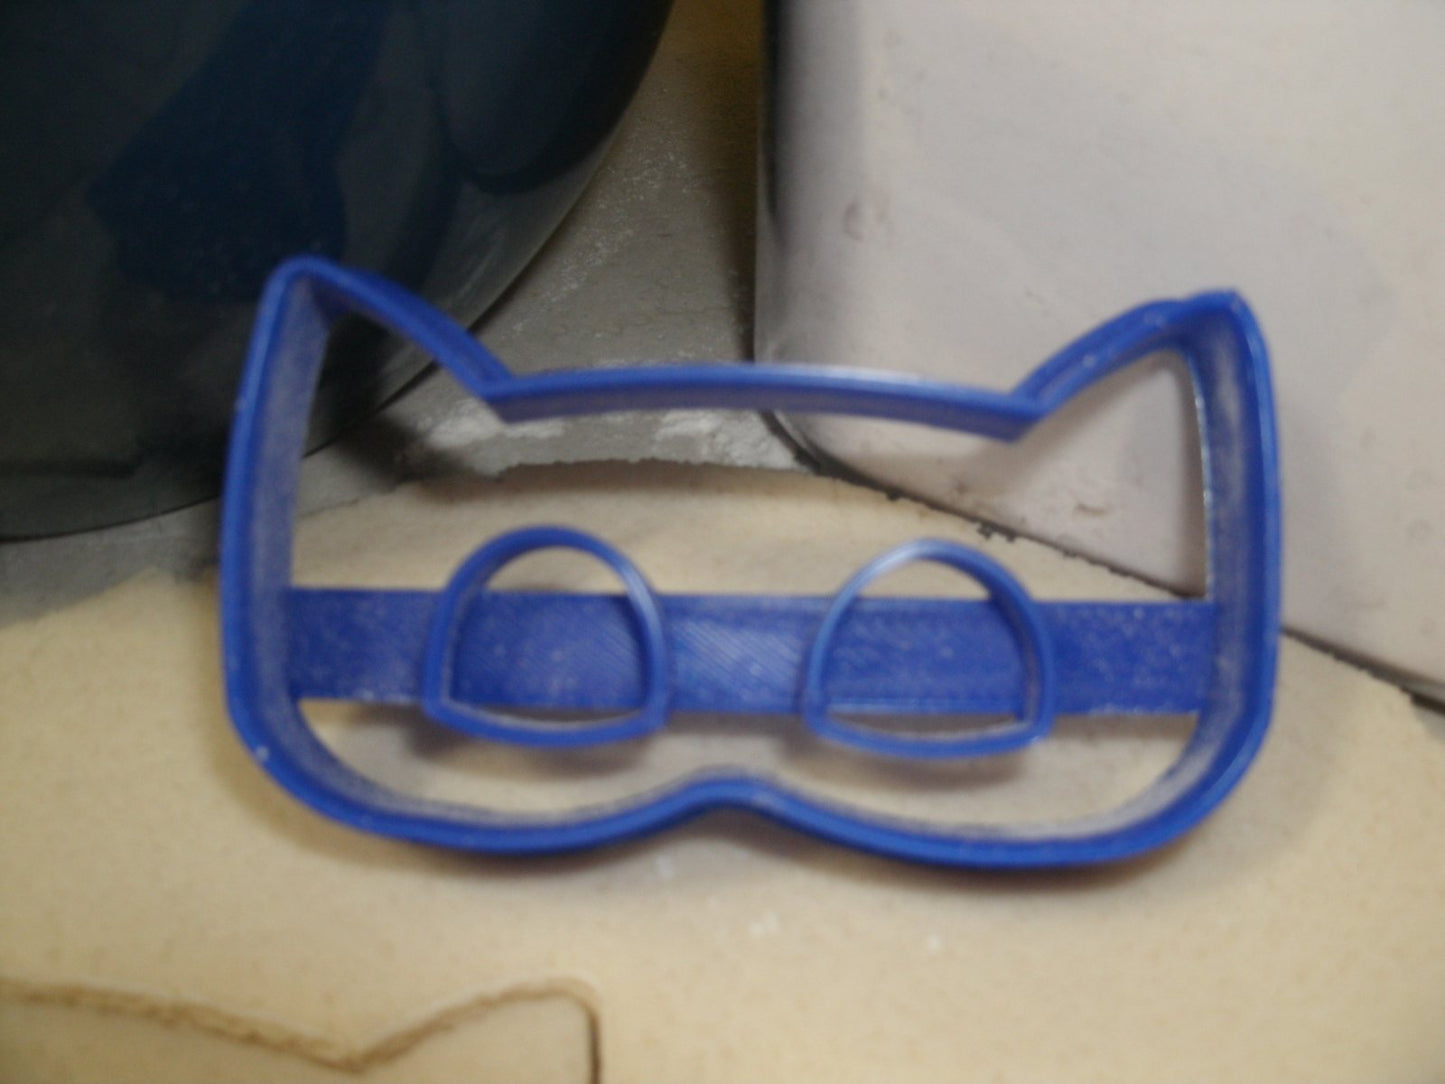 Catboy Cat Boy PJ Masks Character Cookie Cutter Made in USA PR782